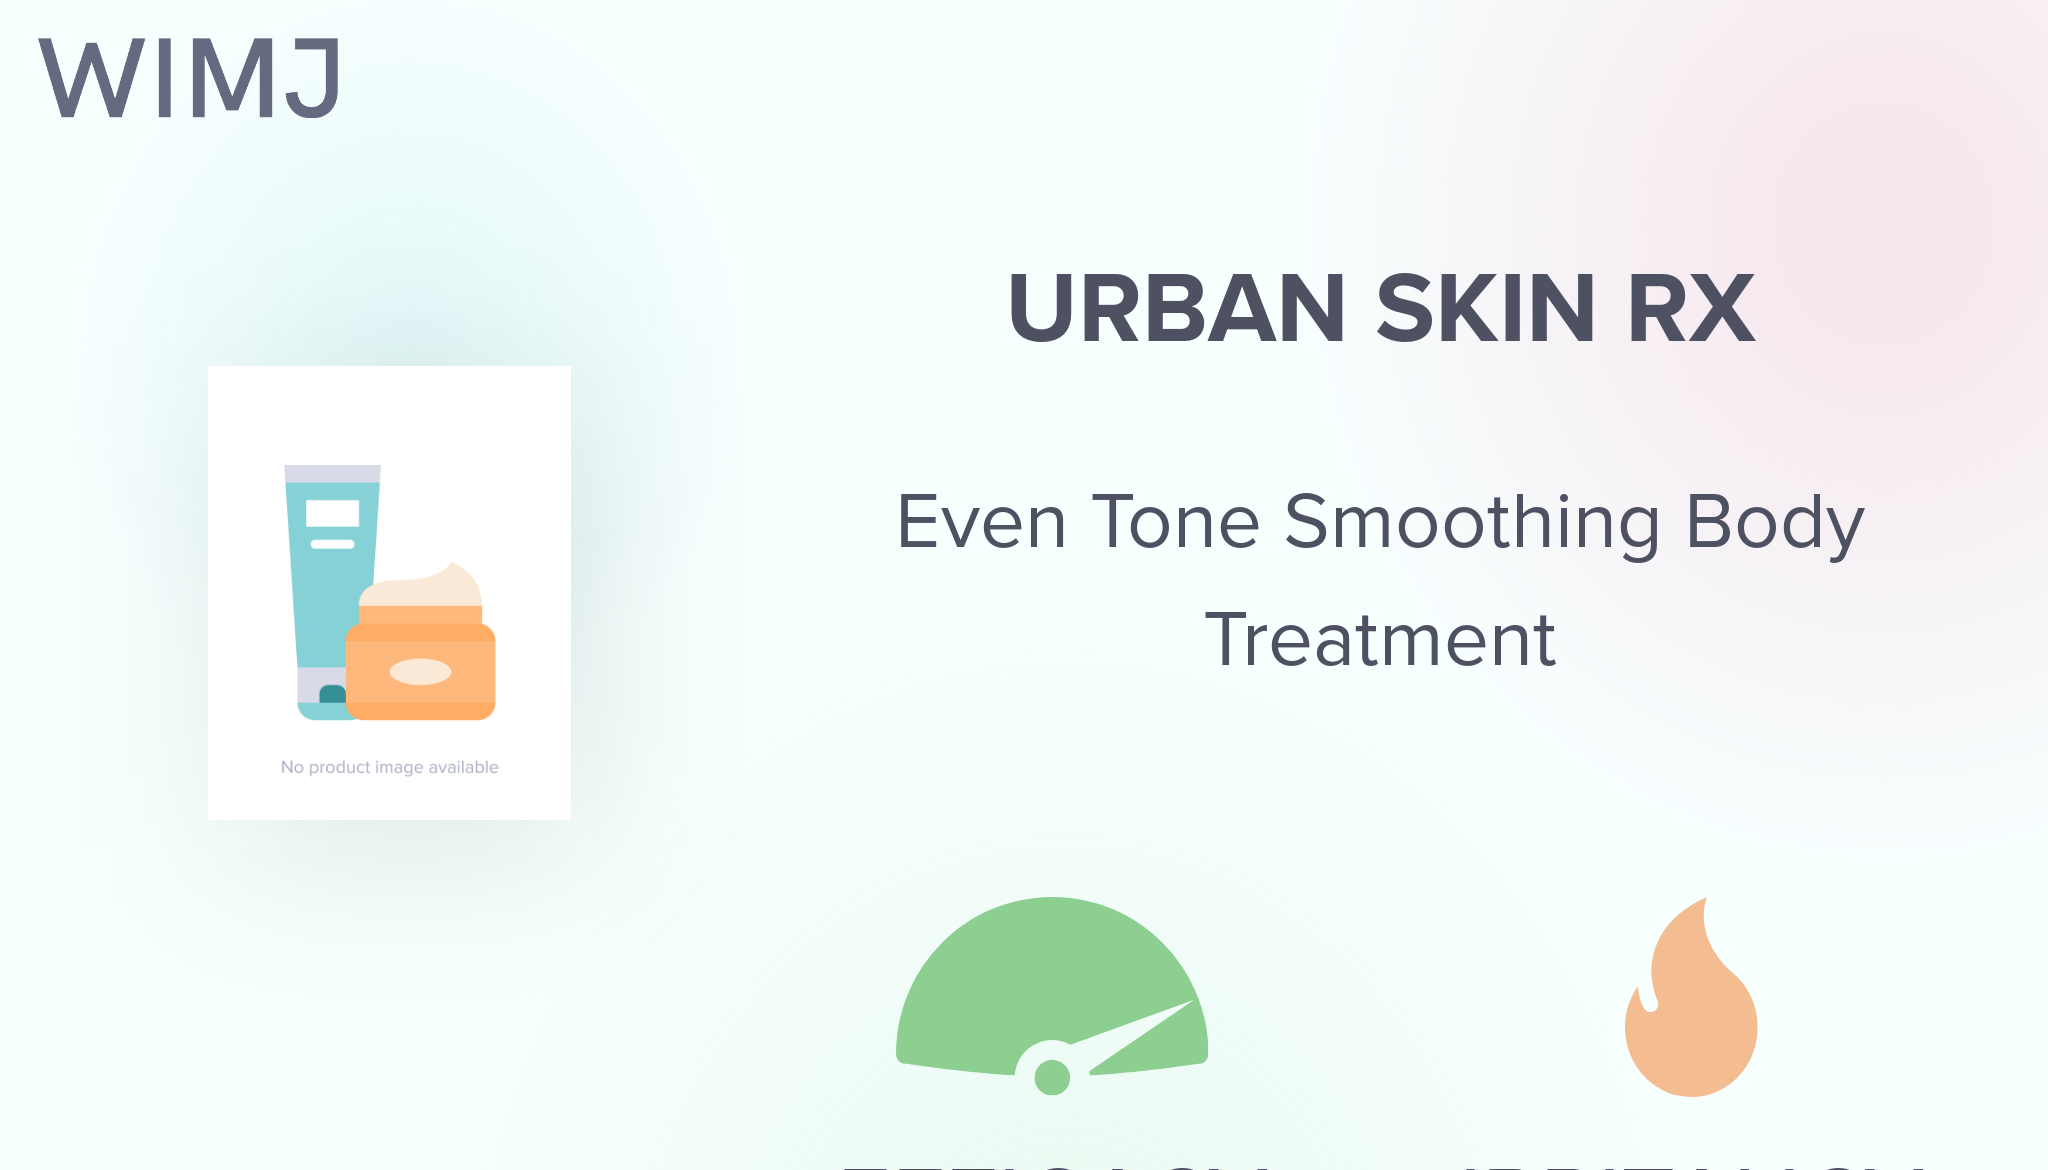 Even Tone Smoothing Body Treatment